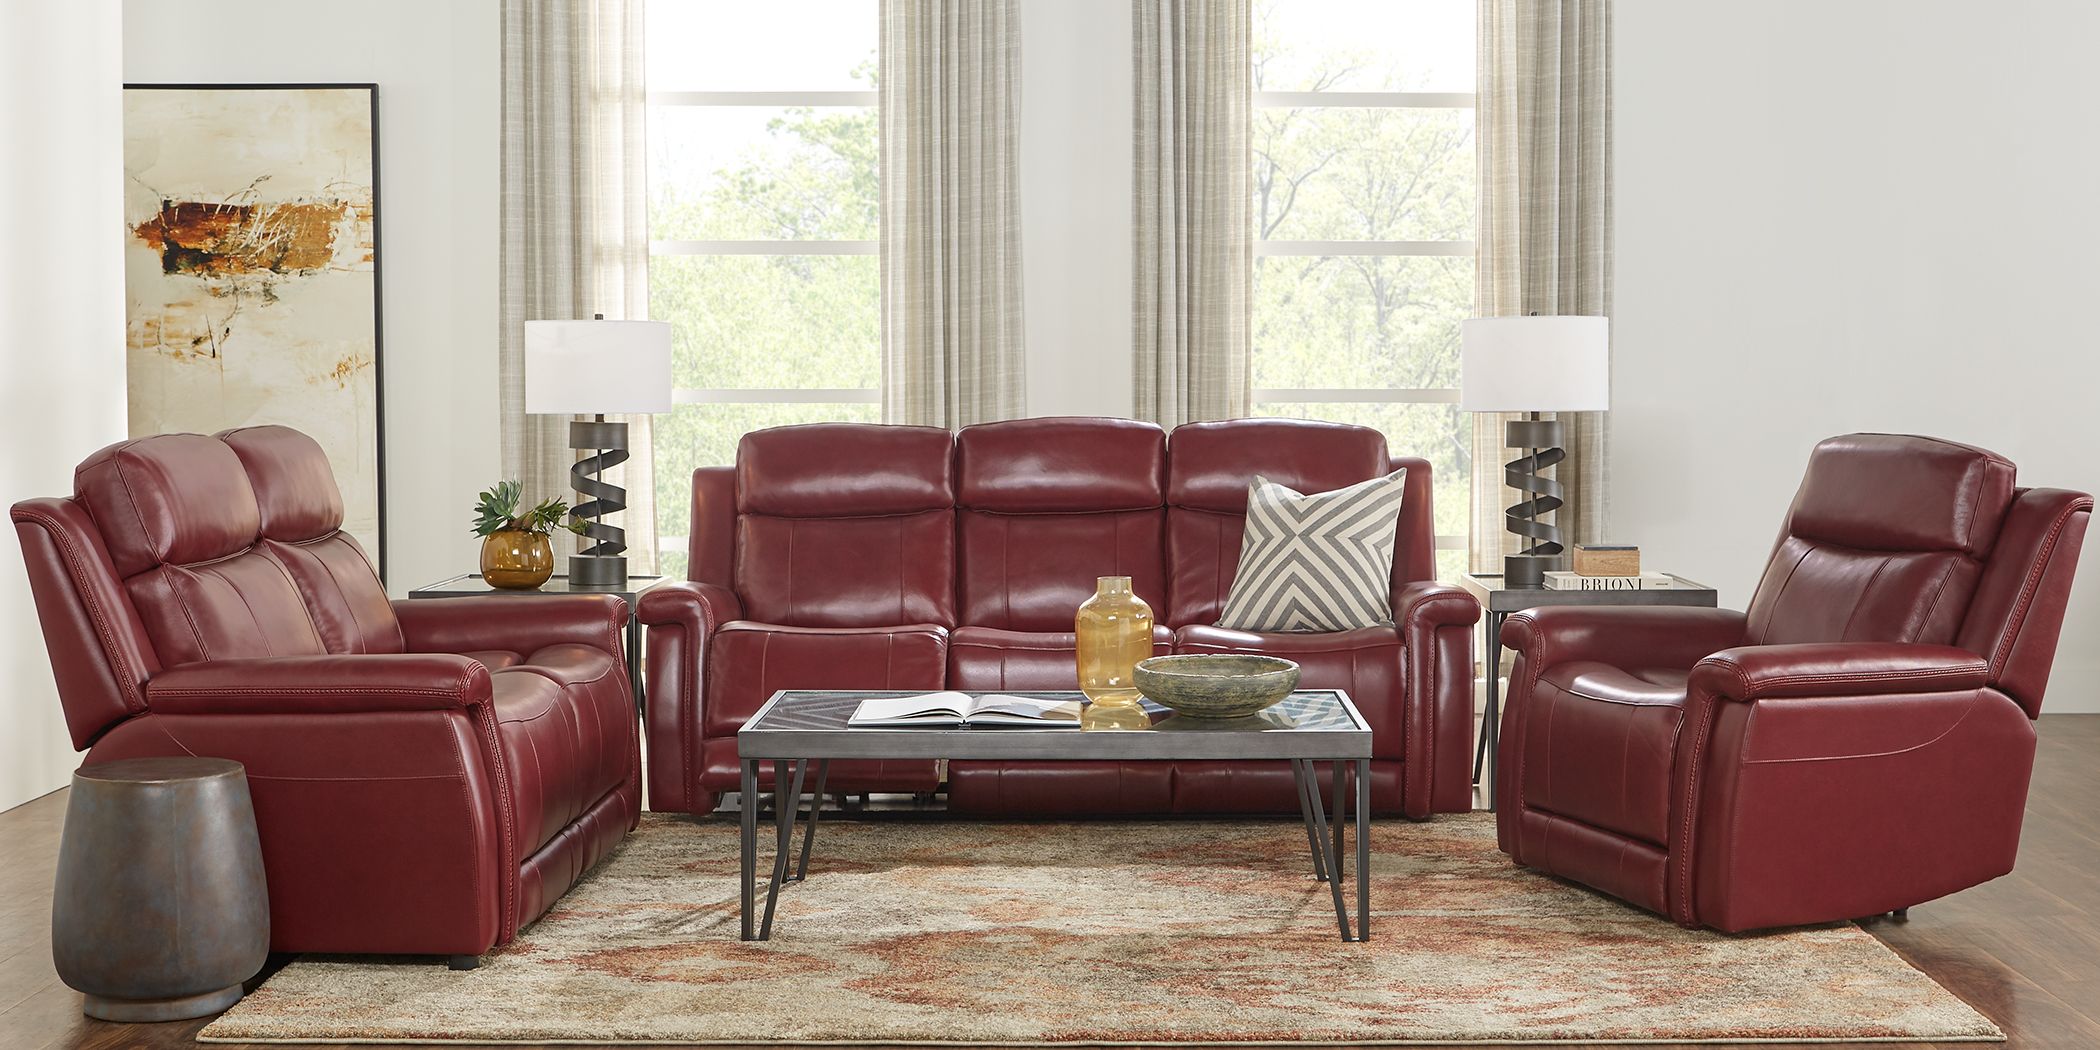 Red Leather Living Room Sets Sofas, Red Leather Sofa And Chair Set